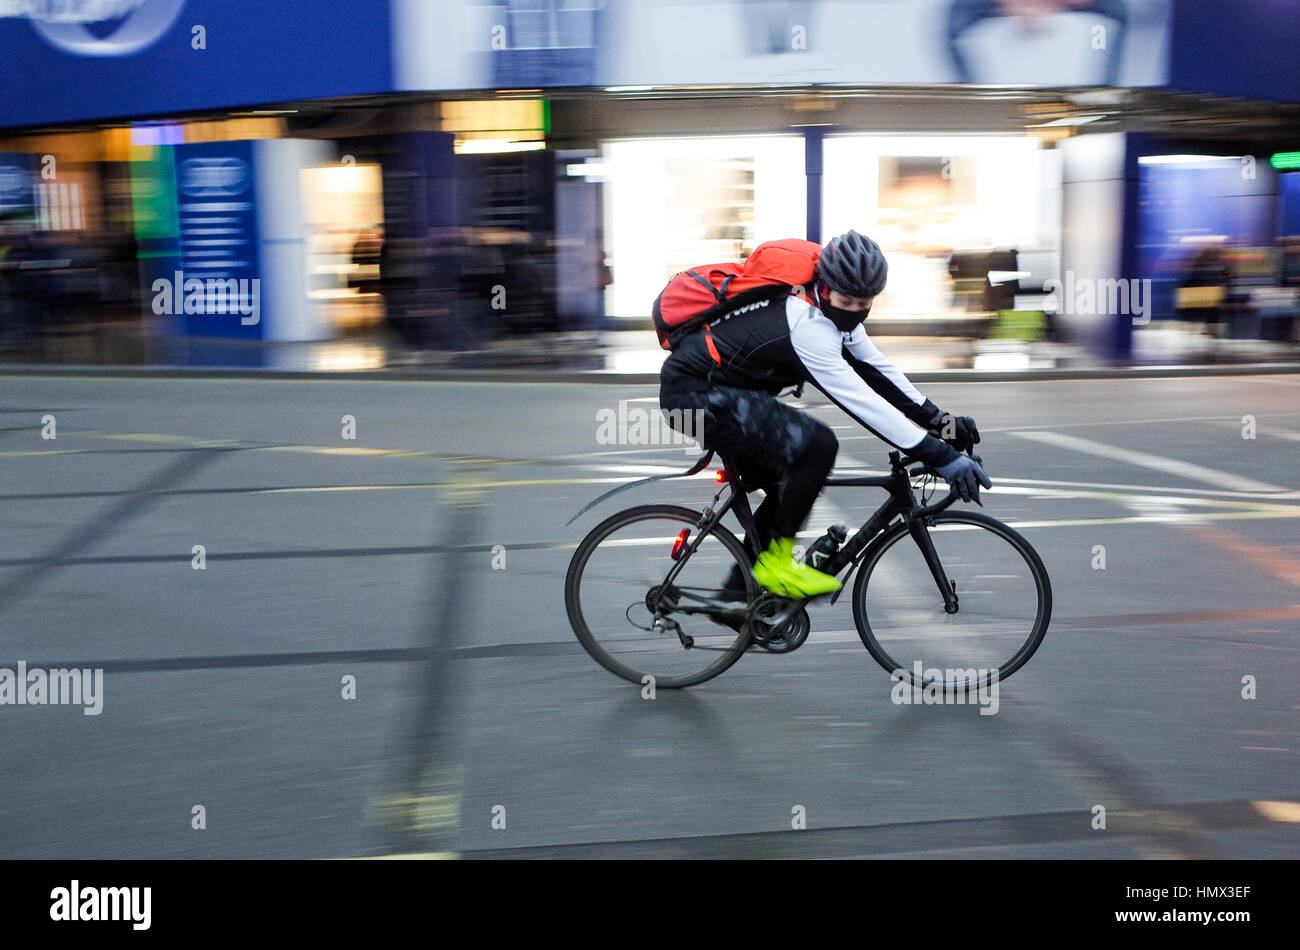 A commuter rides through Central London Stock Photo